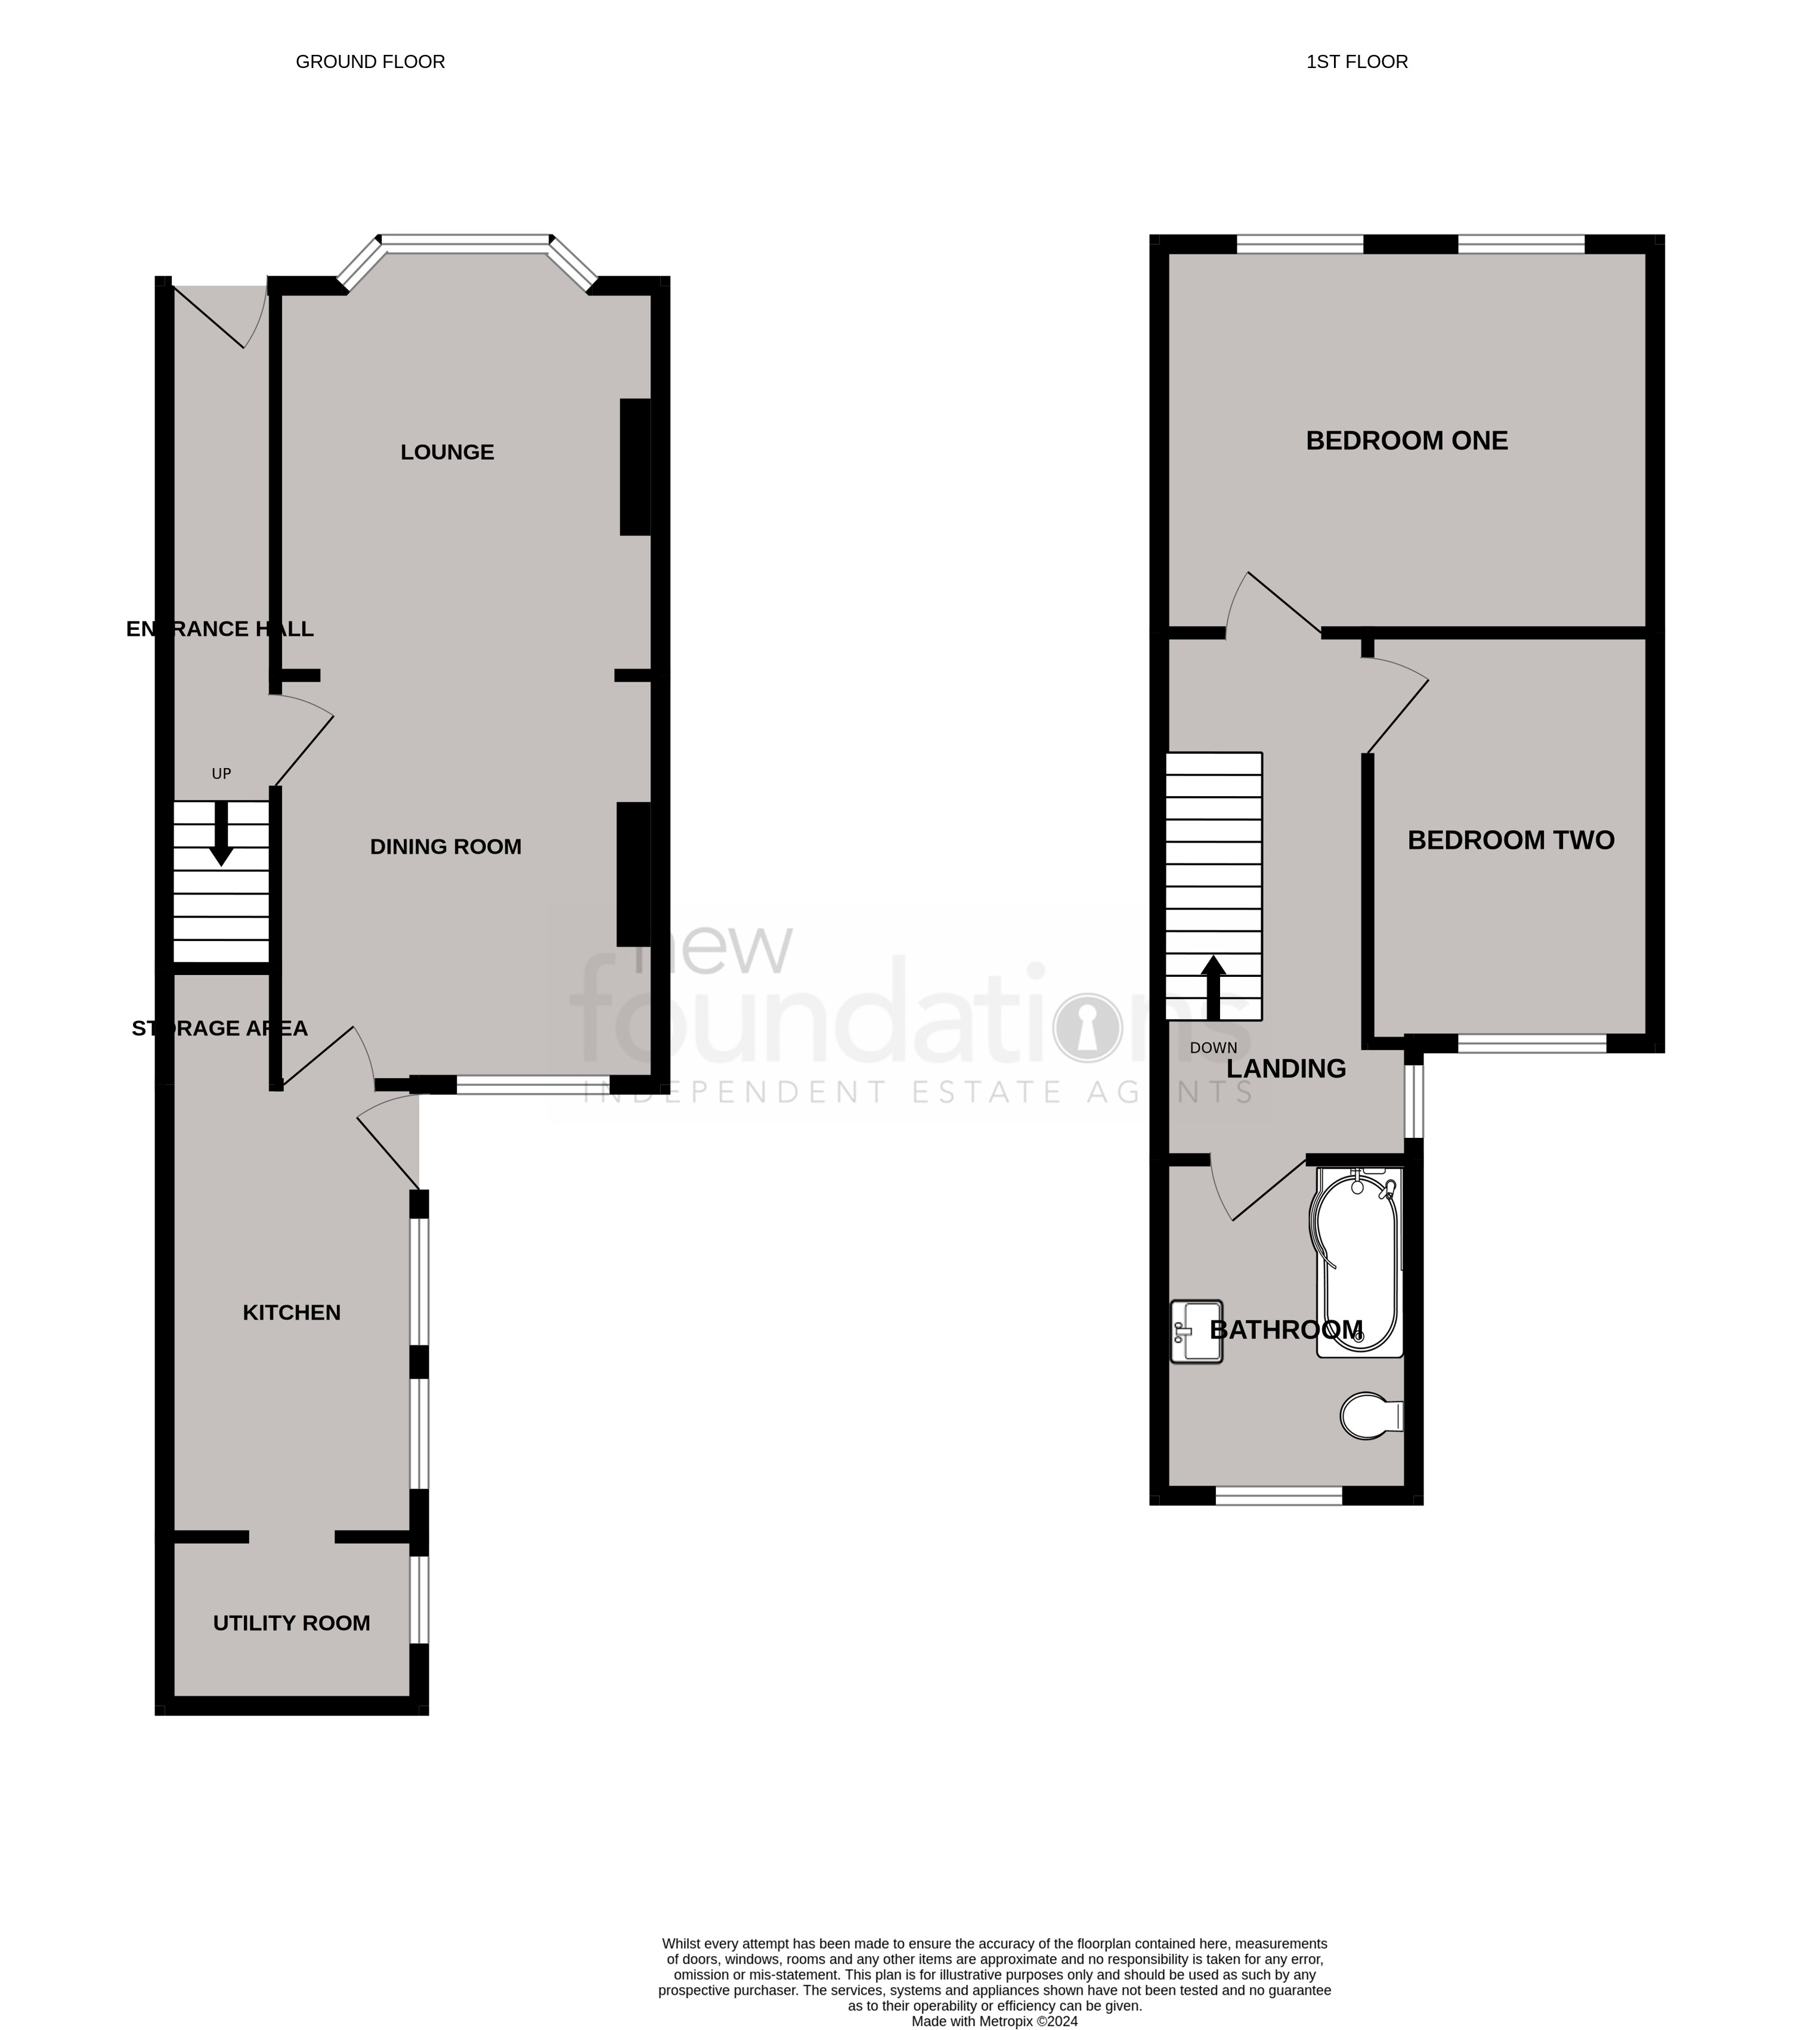 Floorplans For Windsor Road, Bexhill-on-Sea, East Sussex